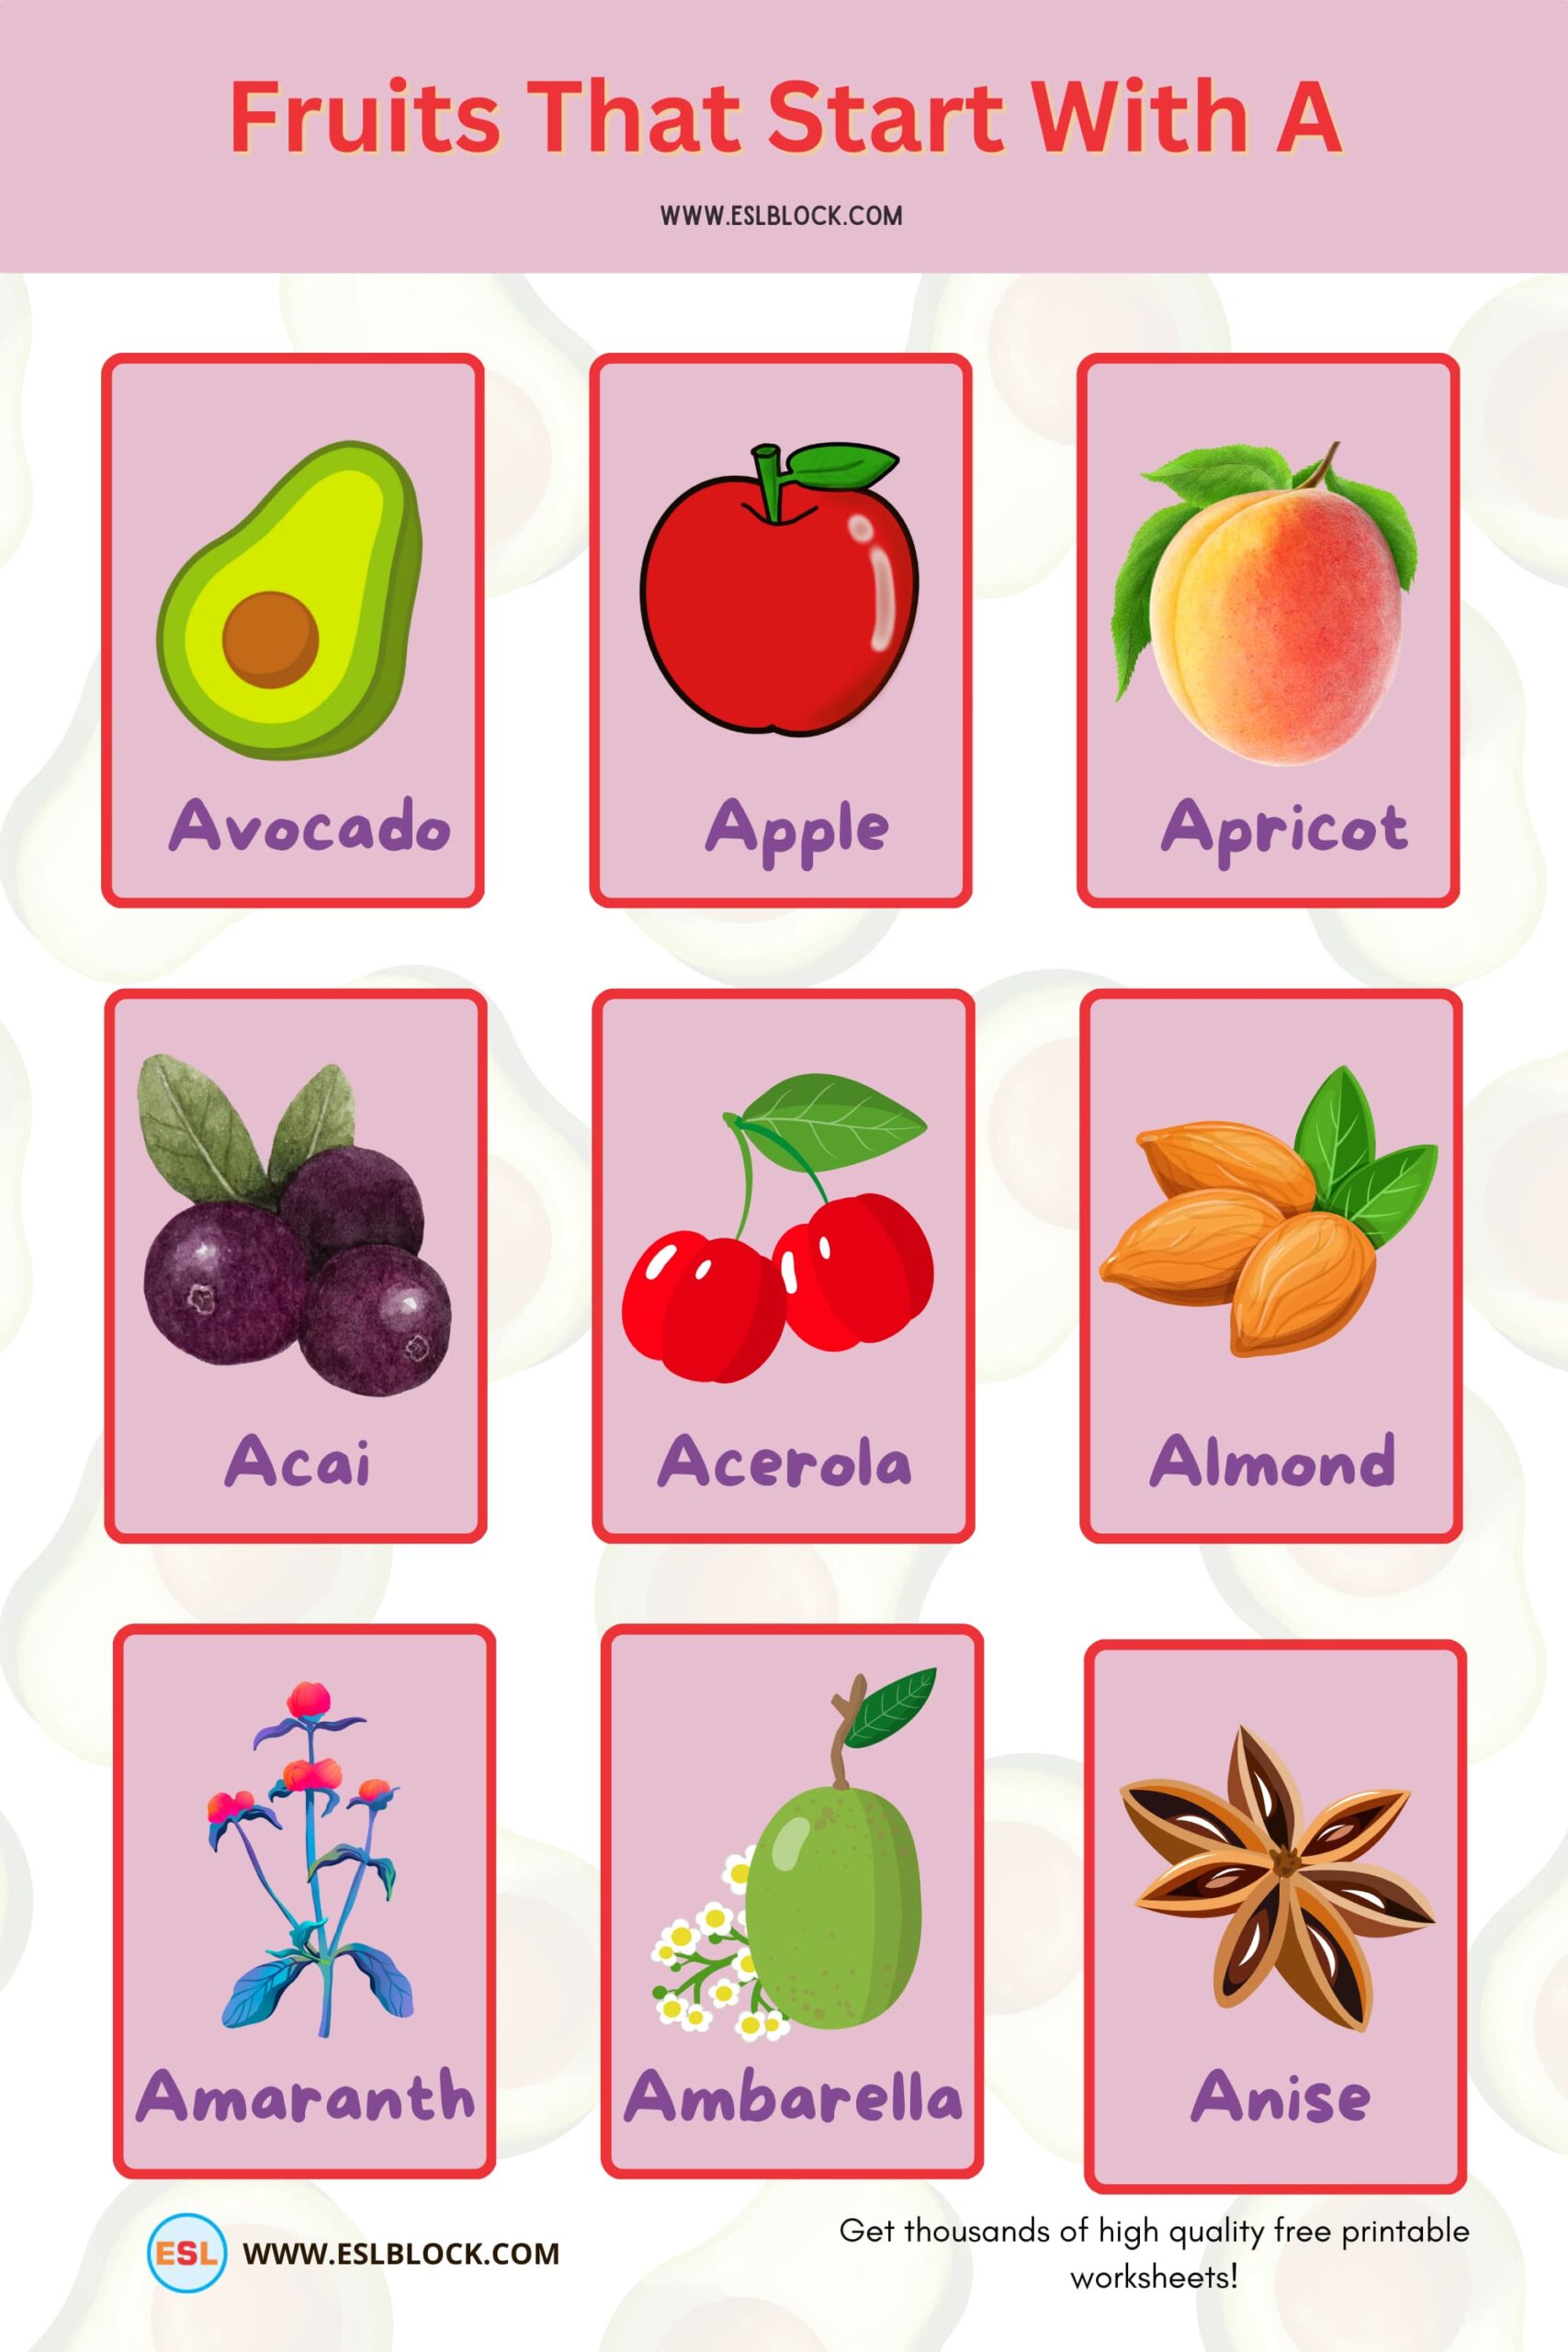 In this article, I will be providing you a list of fruits that start with A in the English language vocabulary.